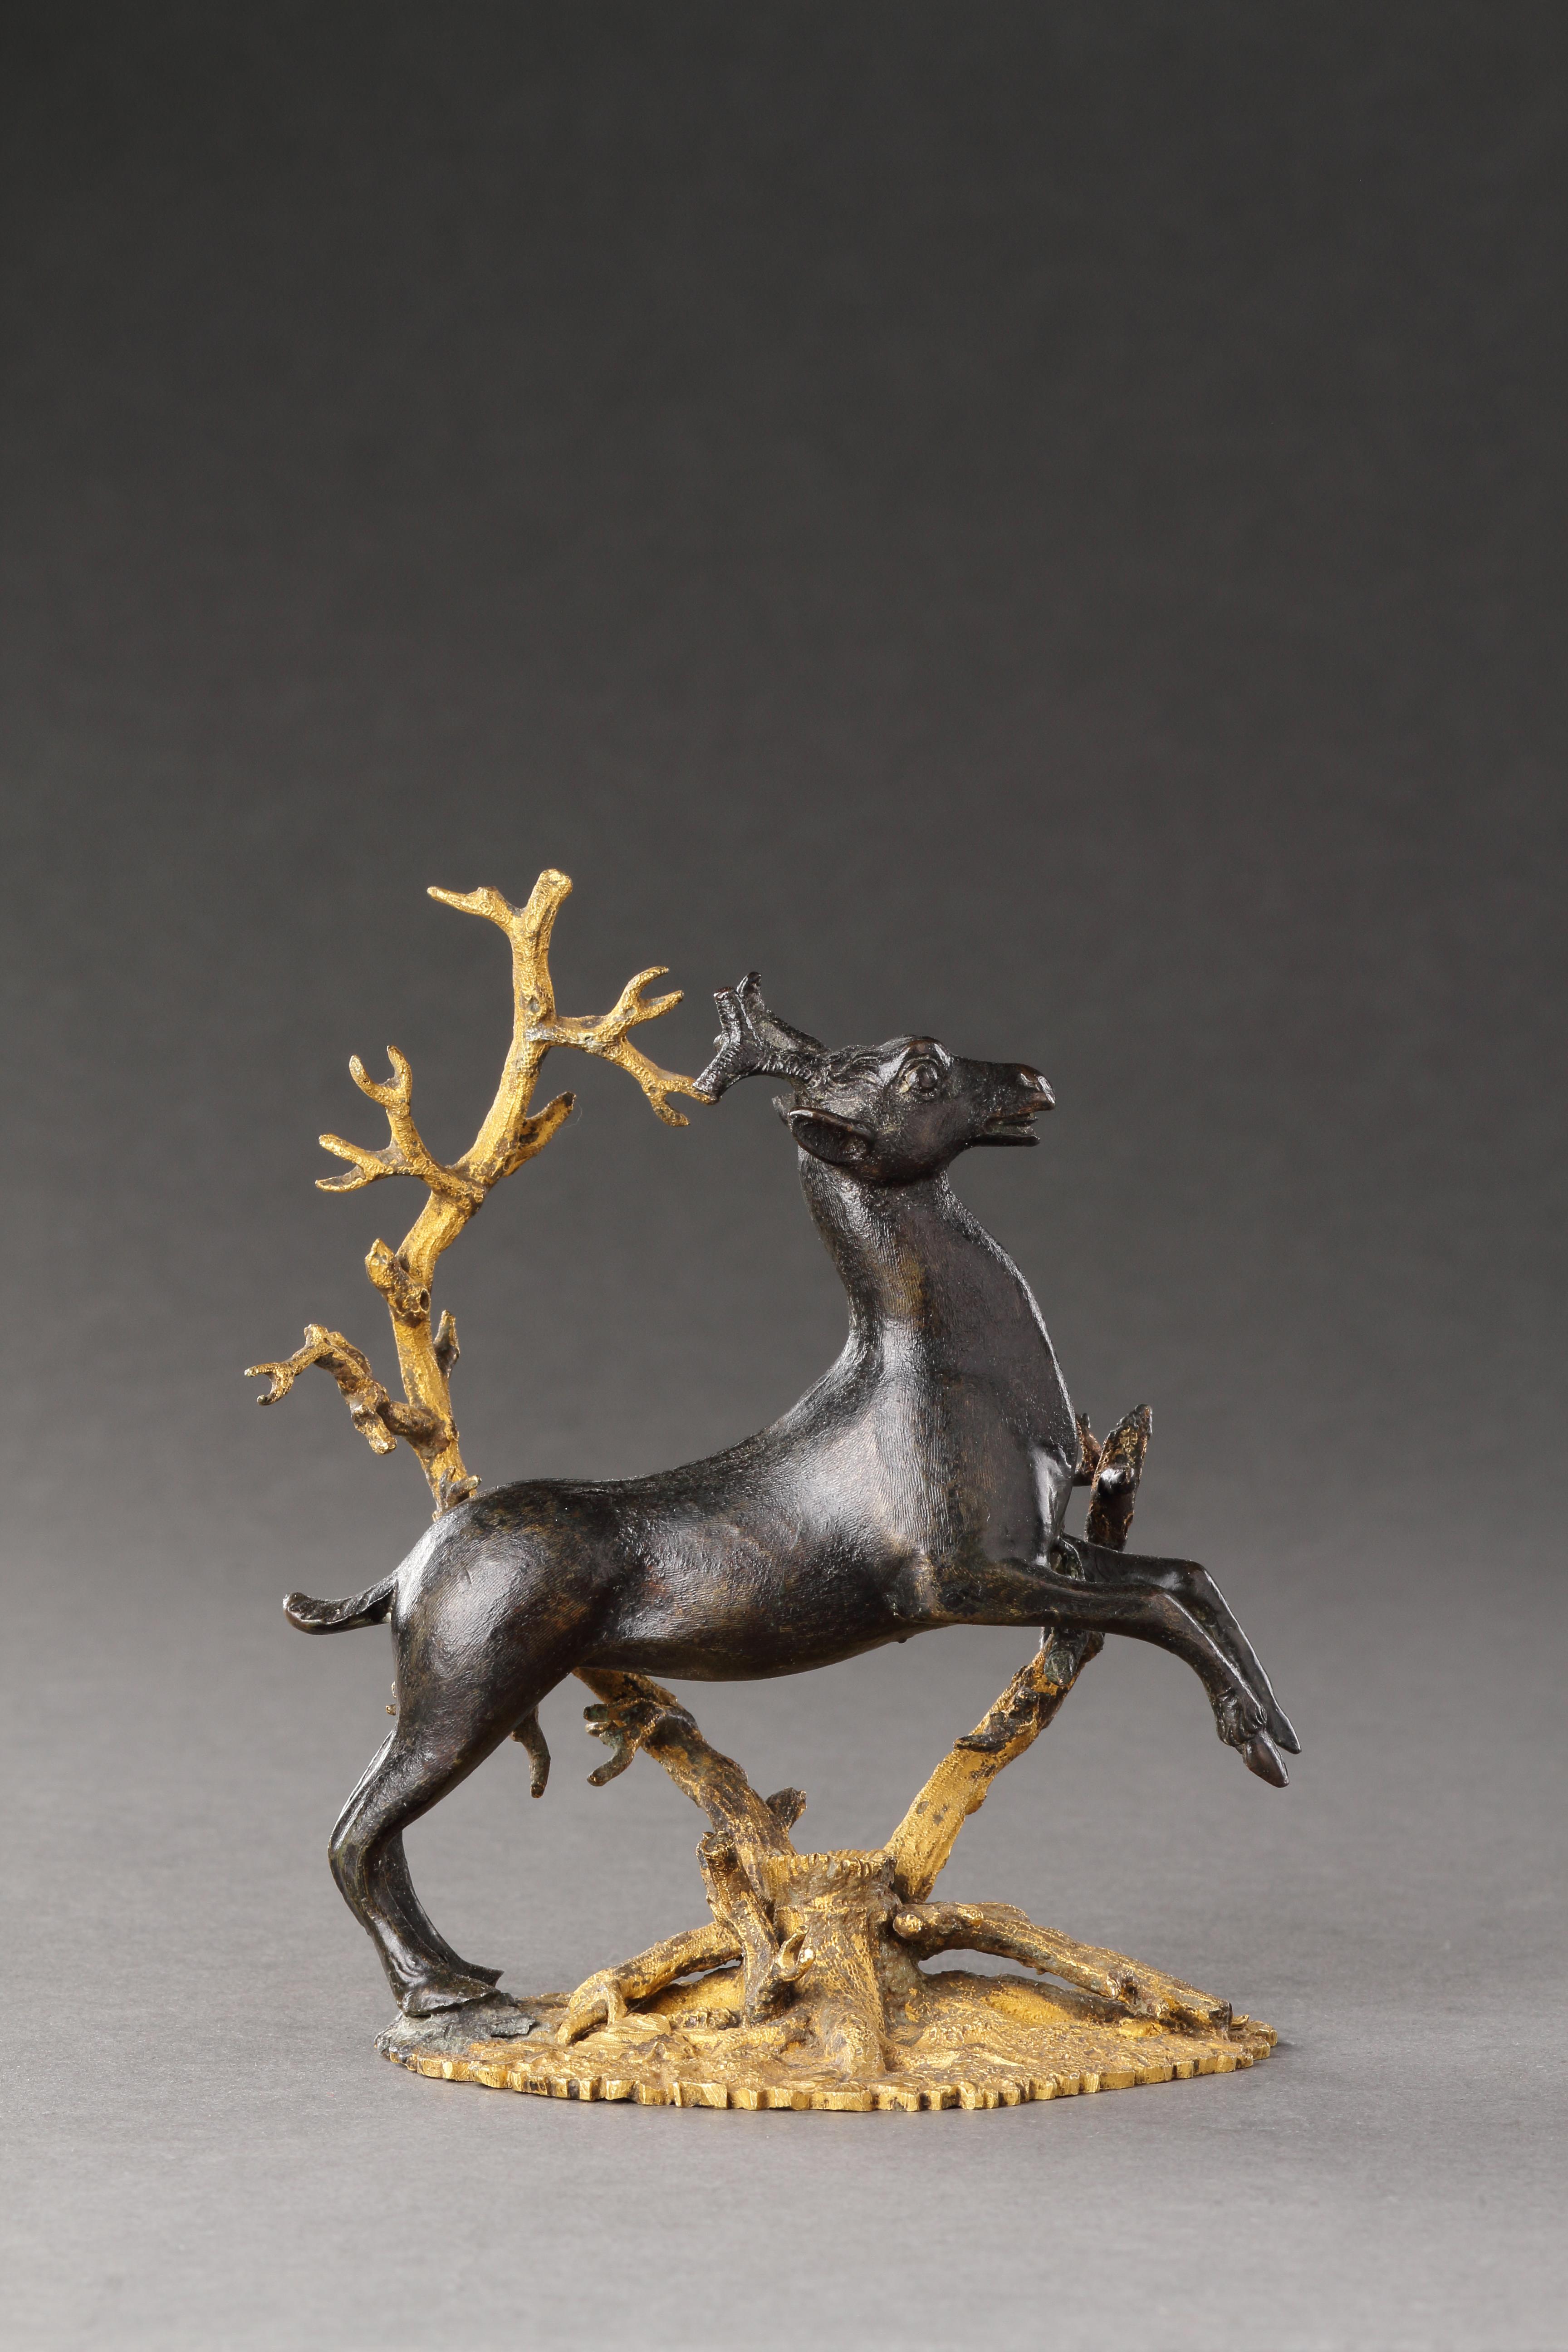 A Small Bronze Group of a Prancing Stag
Bronze, gilt bronze
South Germany; Nuremberg or Augsburg
Late 17th Century / Circa 1620

SIZE: 12cm high - 4¾ ins high

This bronze group, made in southern Germany, bears great similarities with the gilded